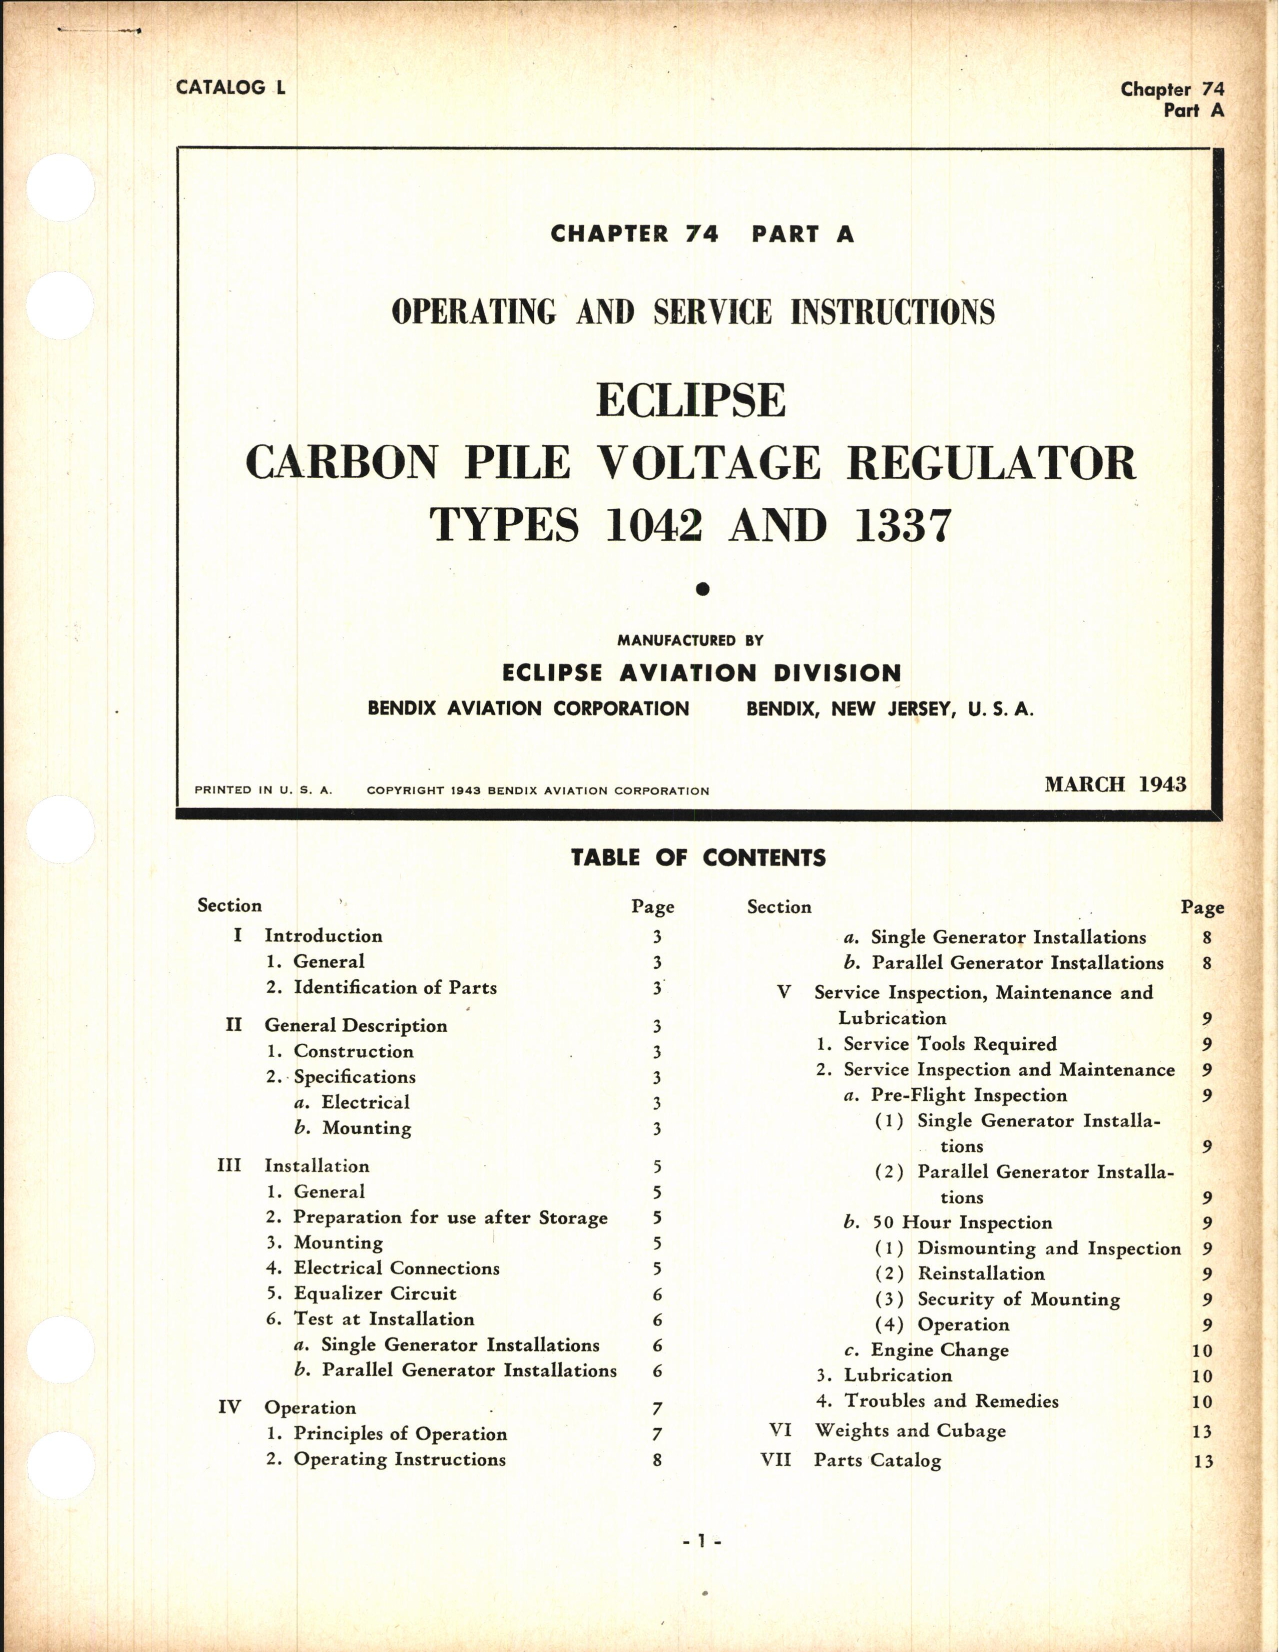 Sample page 1 from AirCorps Library document: Operating and Service Instructions for Carbon Pile Voltage Regulator Types 1042 and 1337